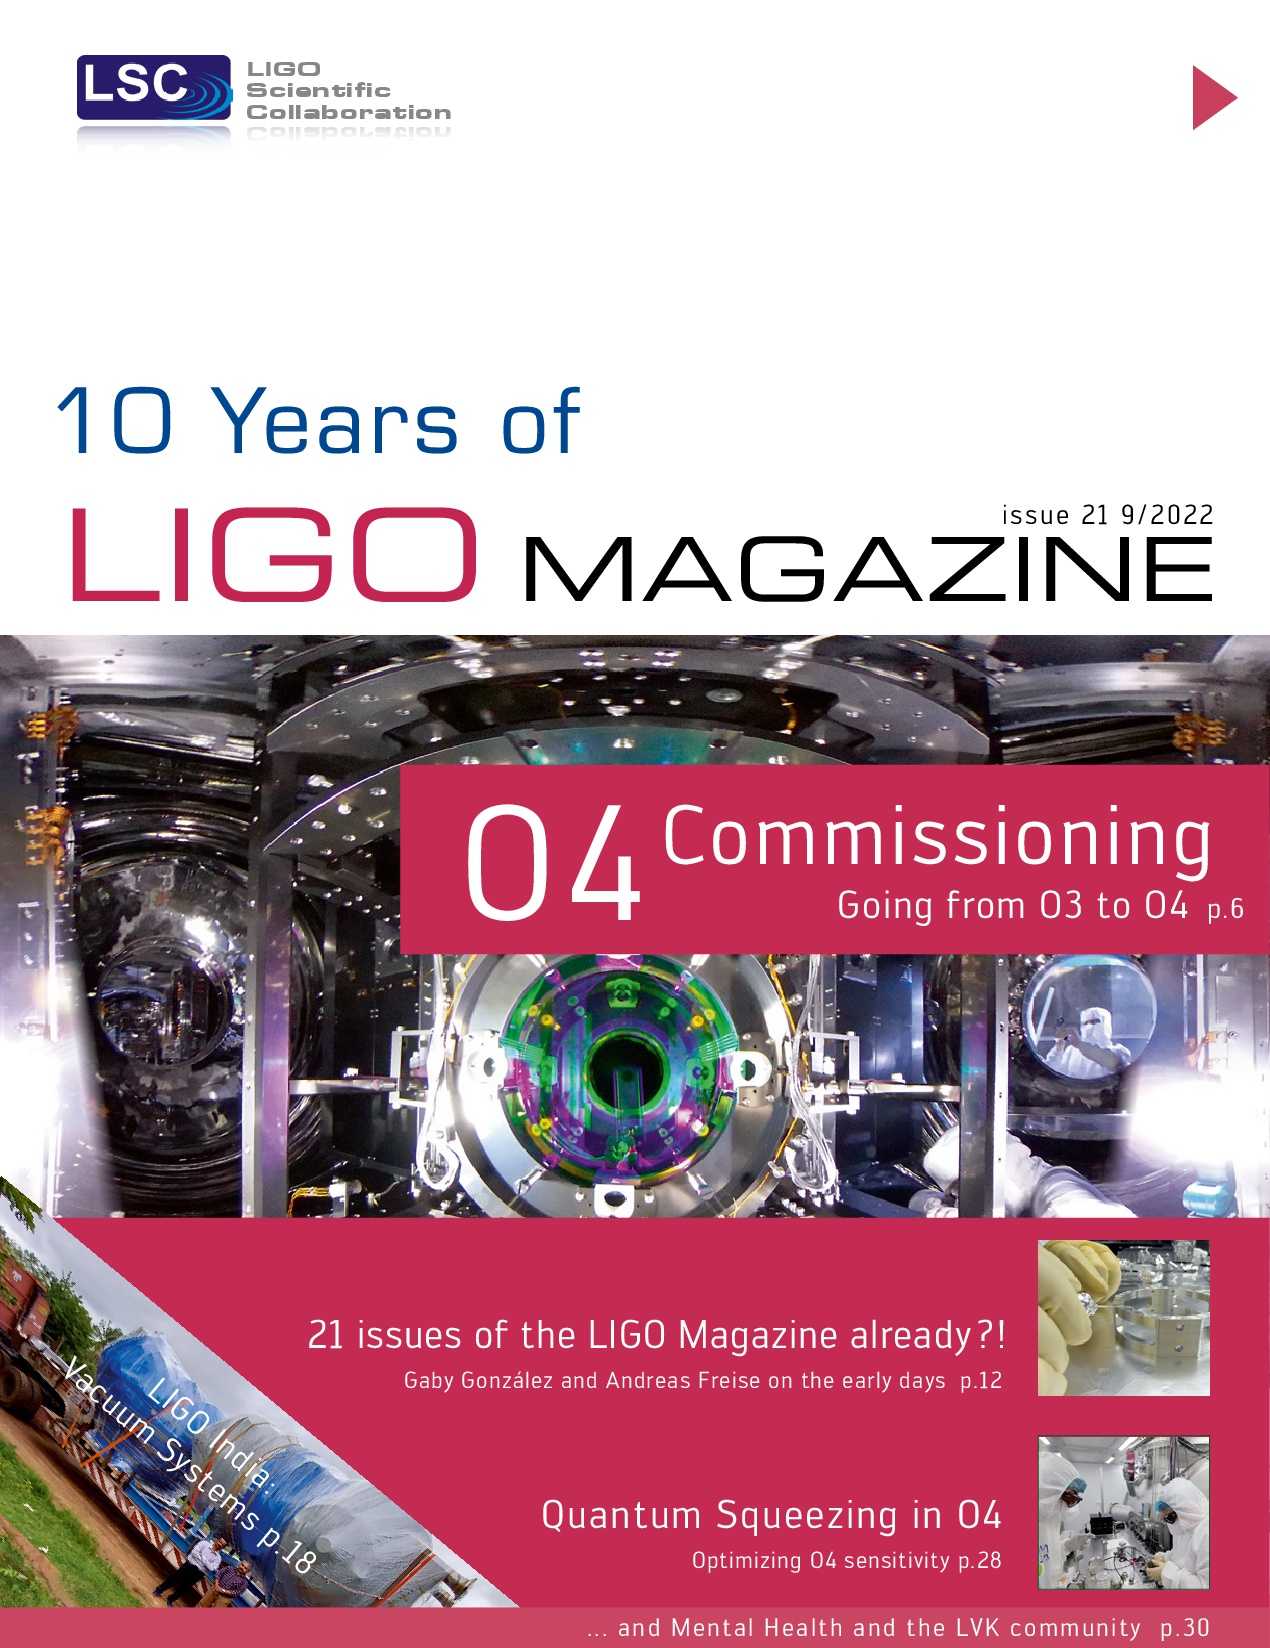 News-Image 21 of: New LIGO Magazine Issue 21 is out